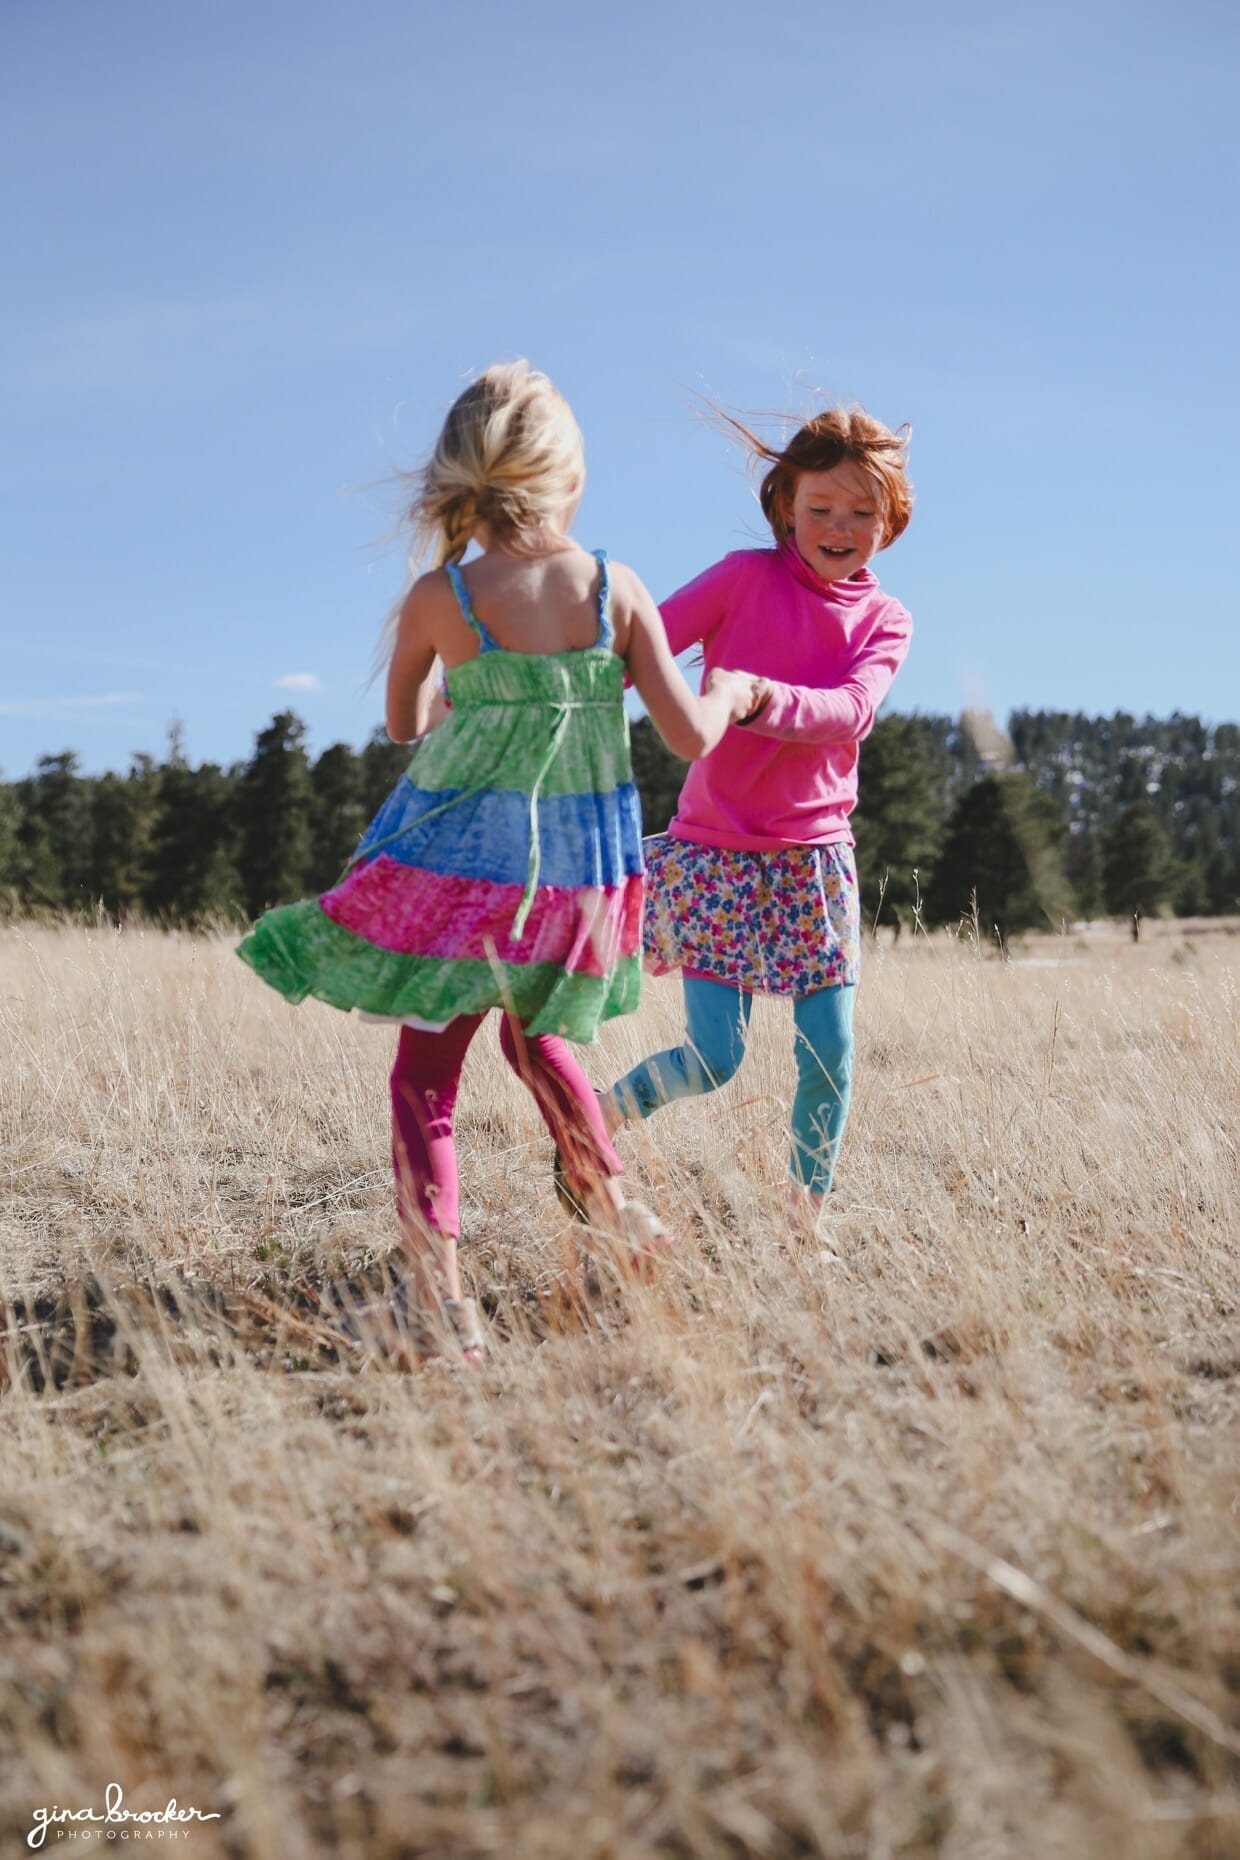 Little girls spin around in a field during their family photo shoot